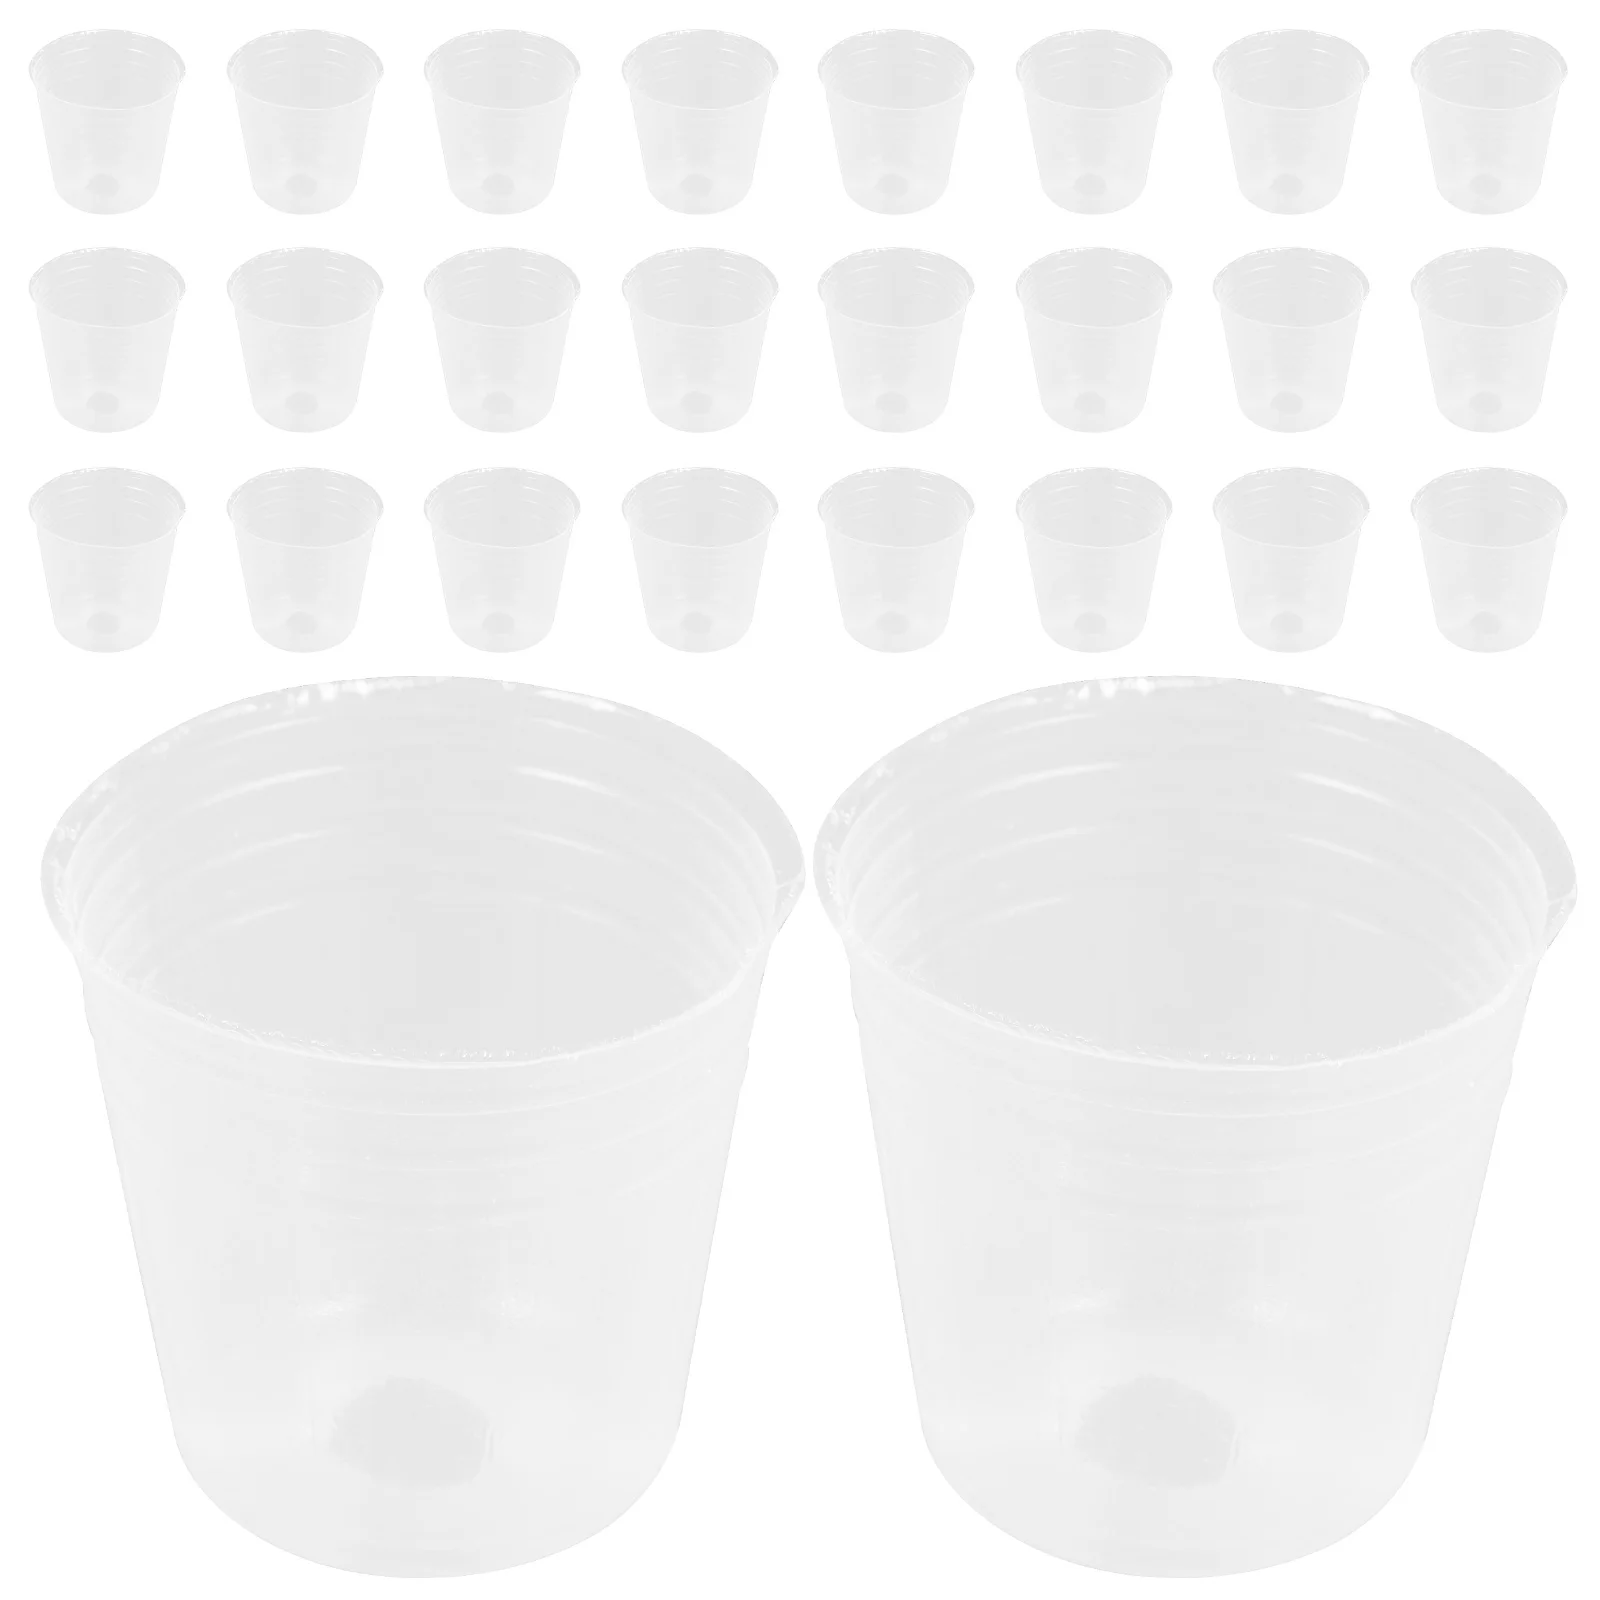 

Nursery Cup Decorative Plant Pots with Drainage Holes Funny Clear Plastic for Plants Flower